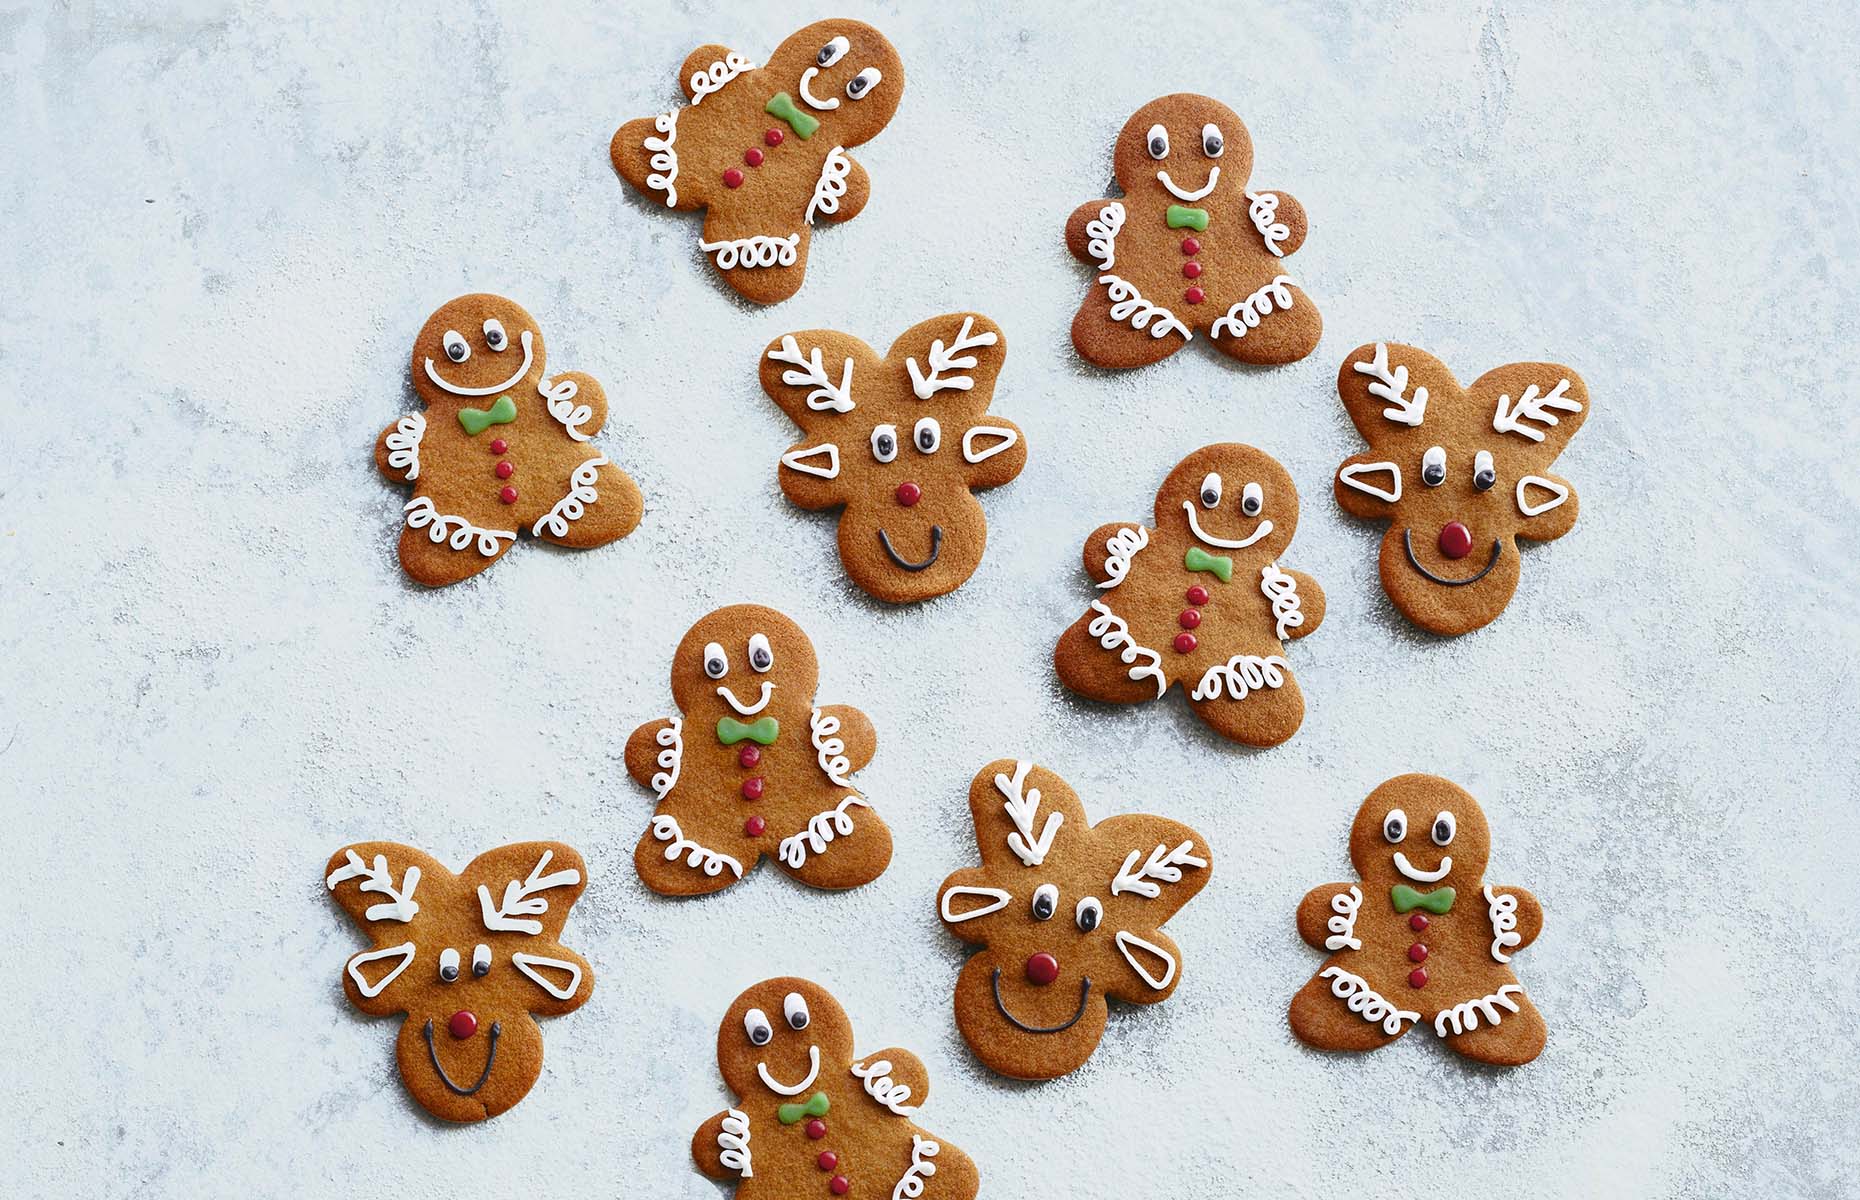 Gingerbread biscuits (Image: Wairtose & Partners/loveFOOD)